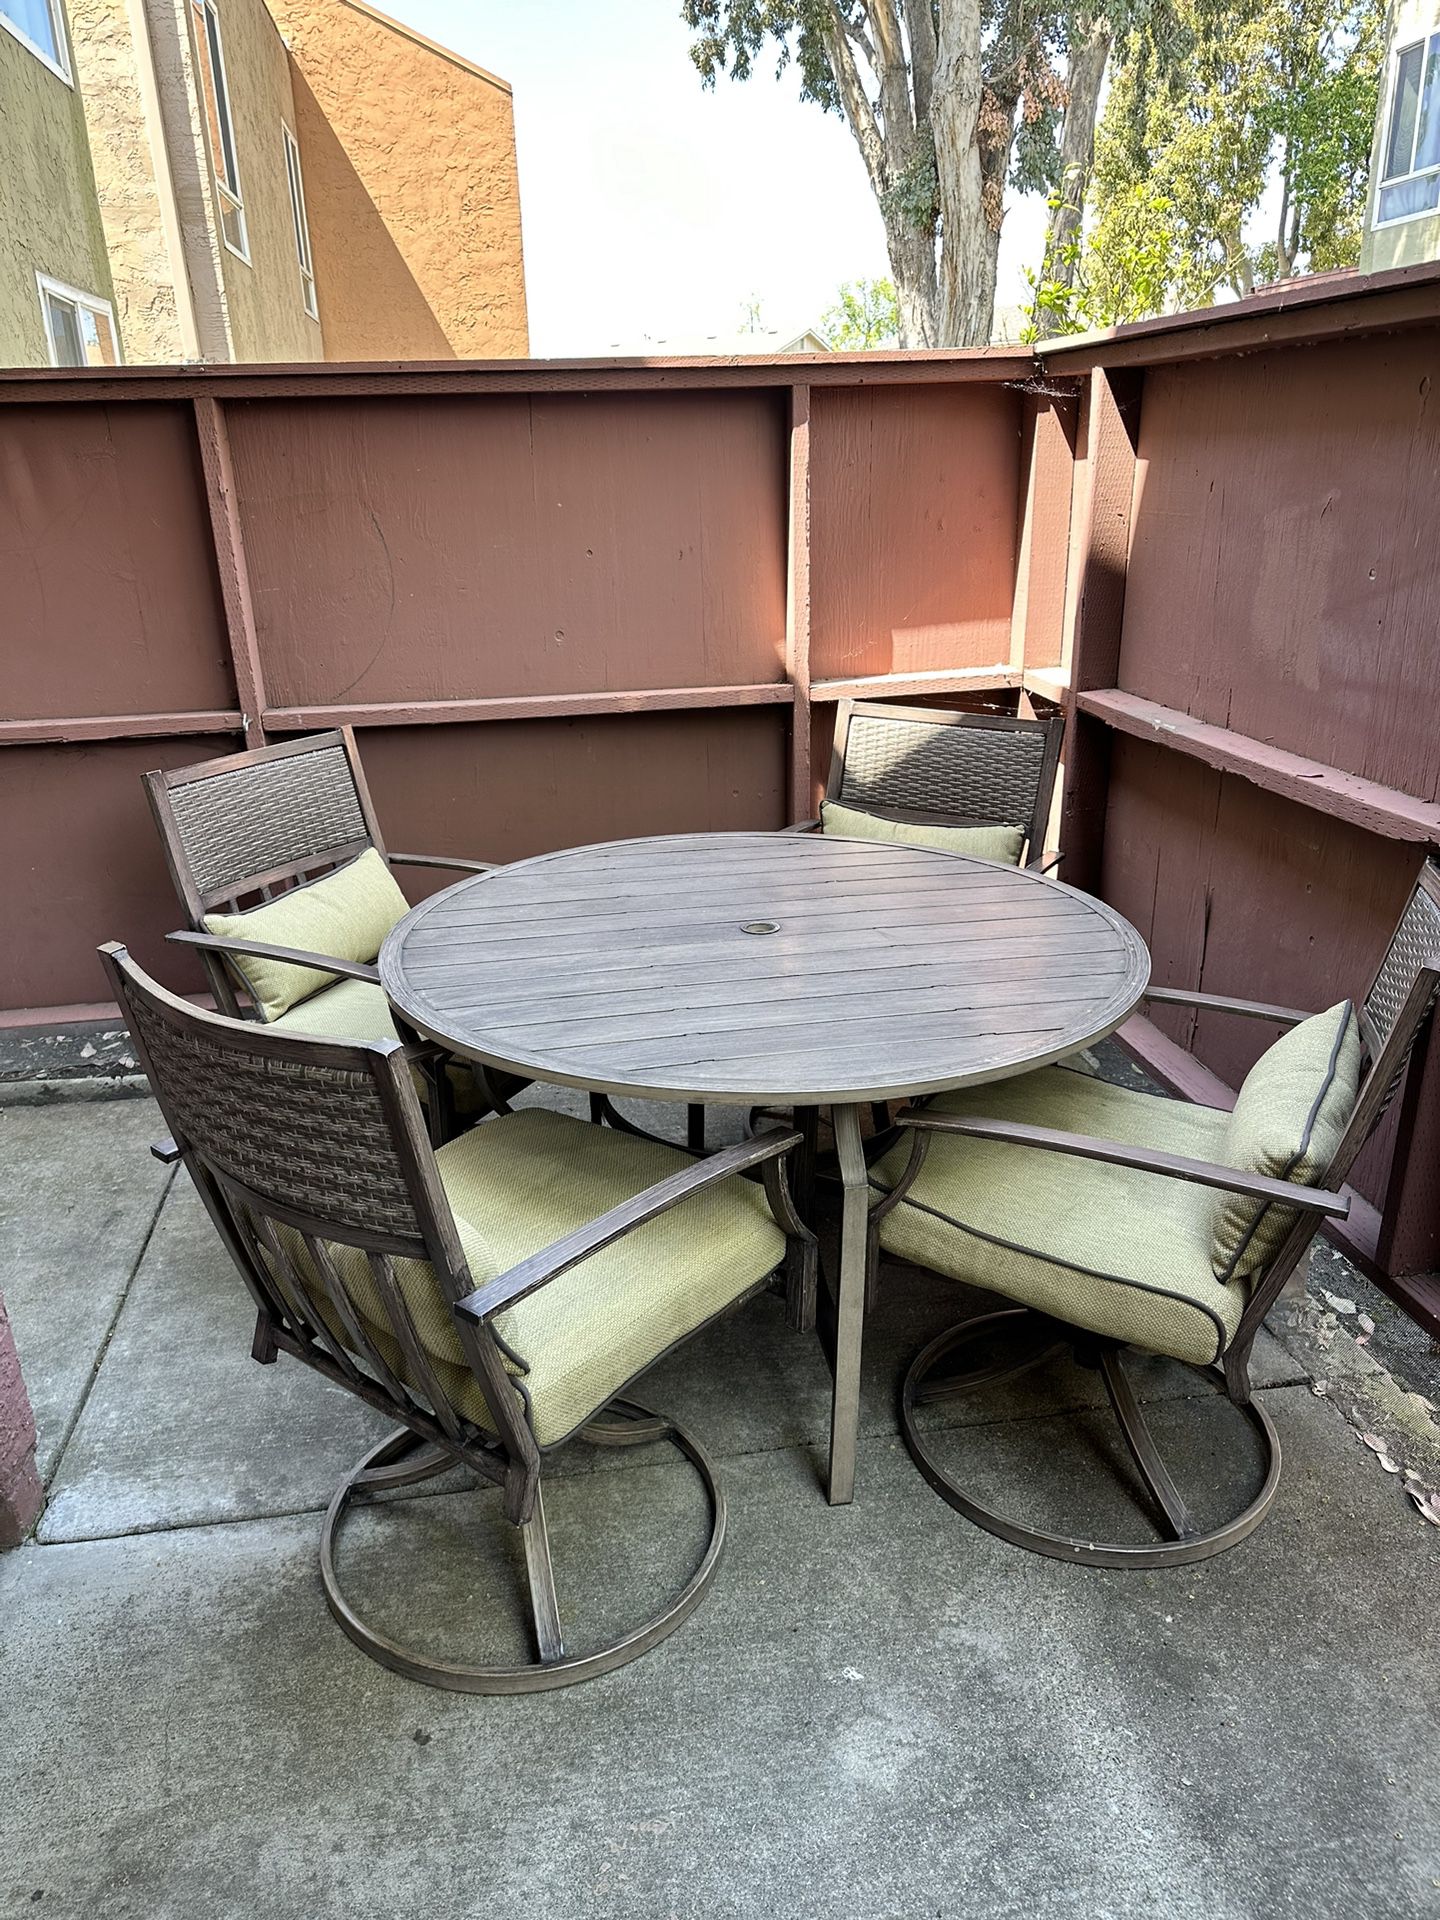 Patio Furniture Set, Table And Chairs.